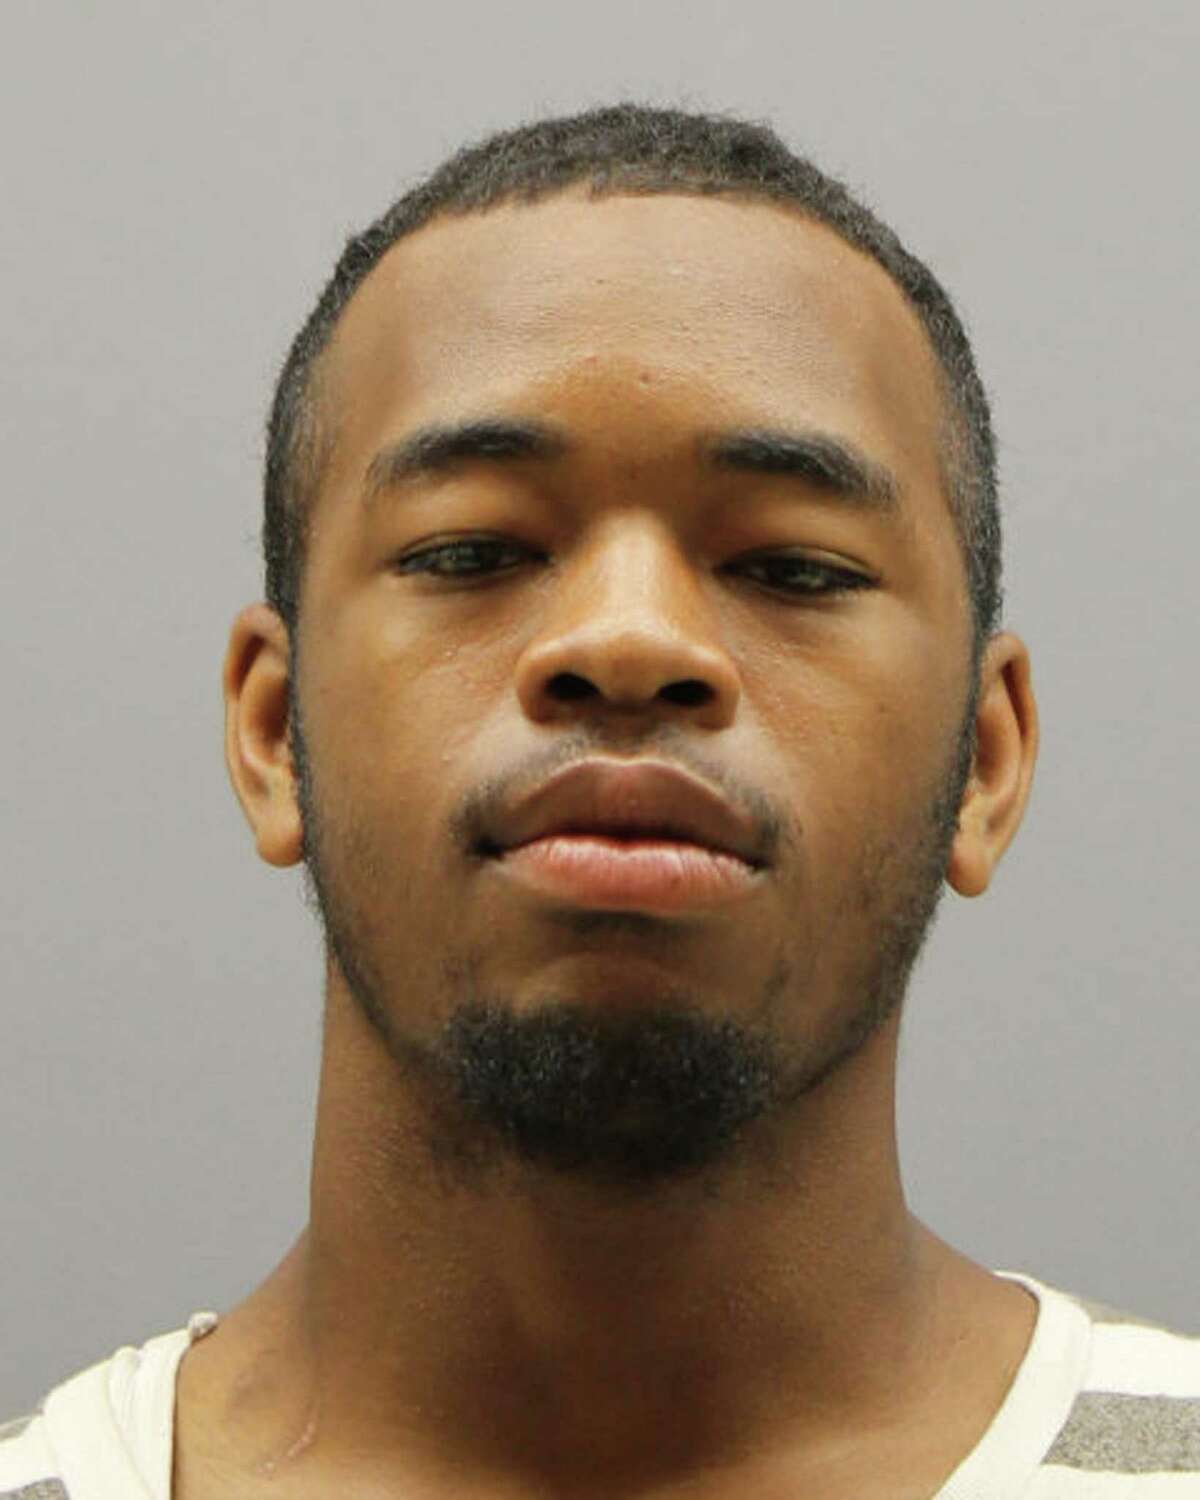 This photo provided by the Metropolitan Police Department shows Jasper Spires, who has been arrested for first degree murder while armed for the stabbing death of Kevin Sutherland, 24, the first-ever homicide aboard a Metro train in the nearly 40-year history of the D.C. region’s subway system.